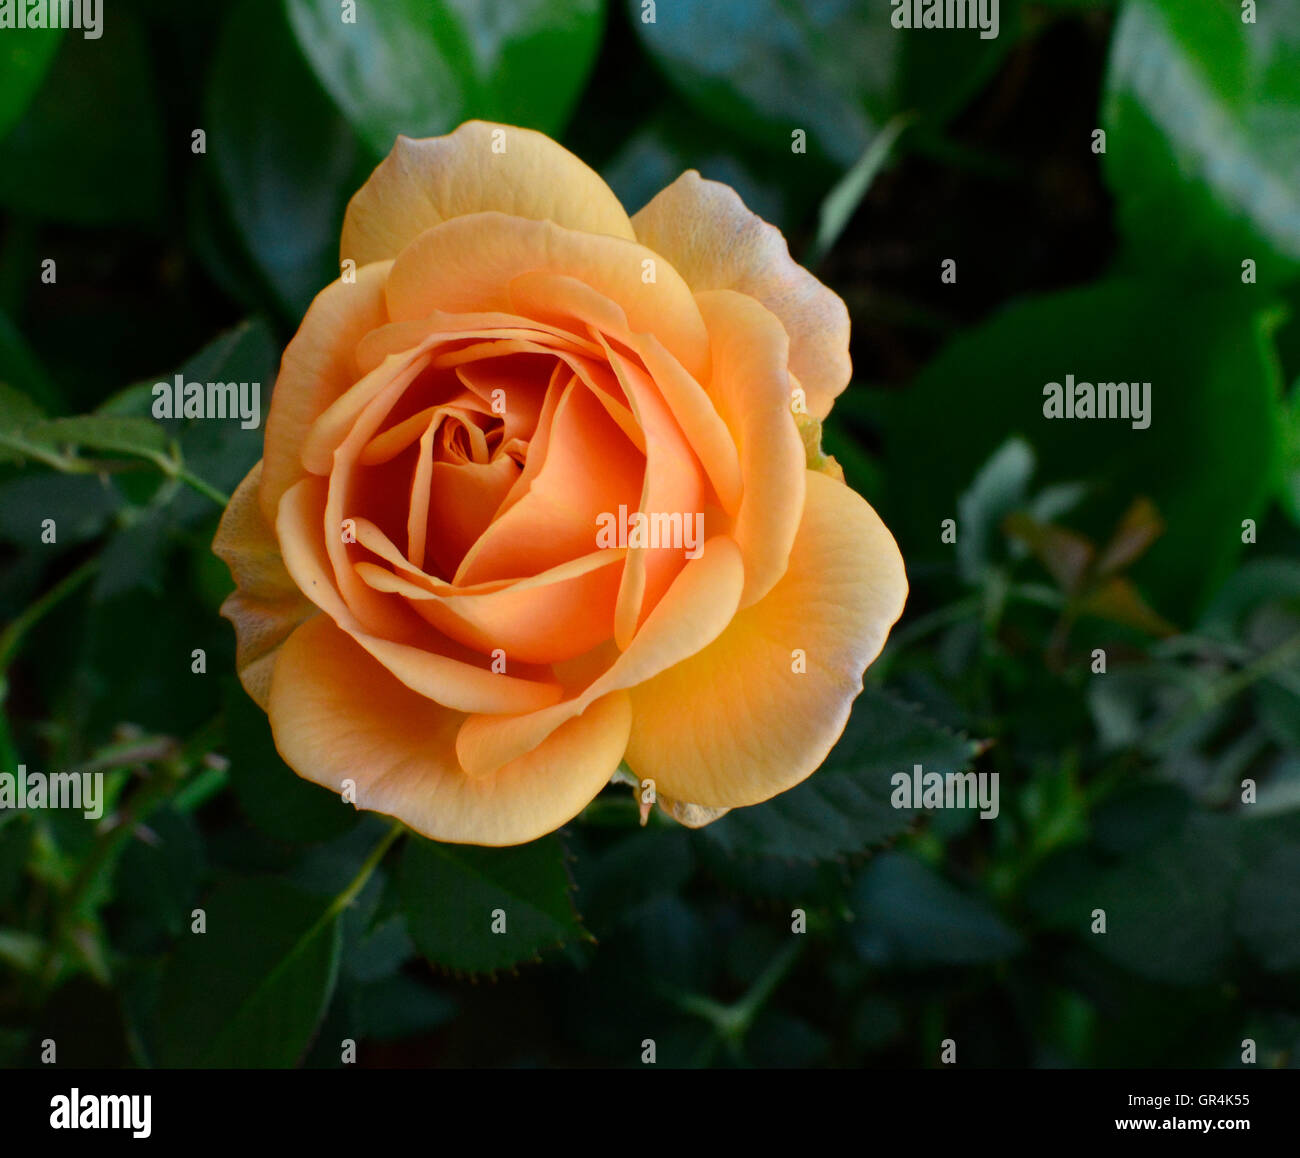 Beautiful orange rose against a dark green soft background. Rose only partially open. Top view. Stock Photo